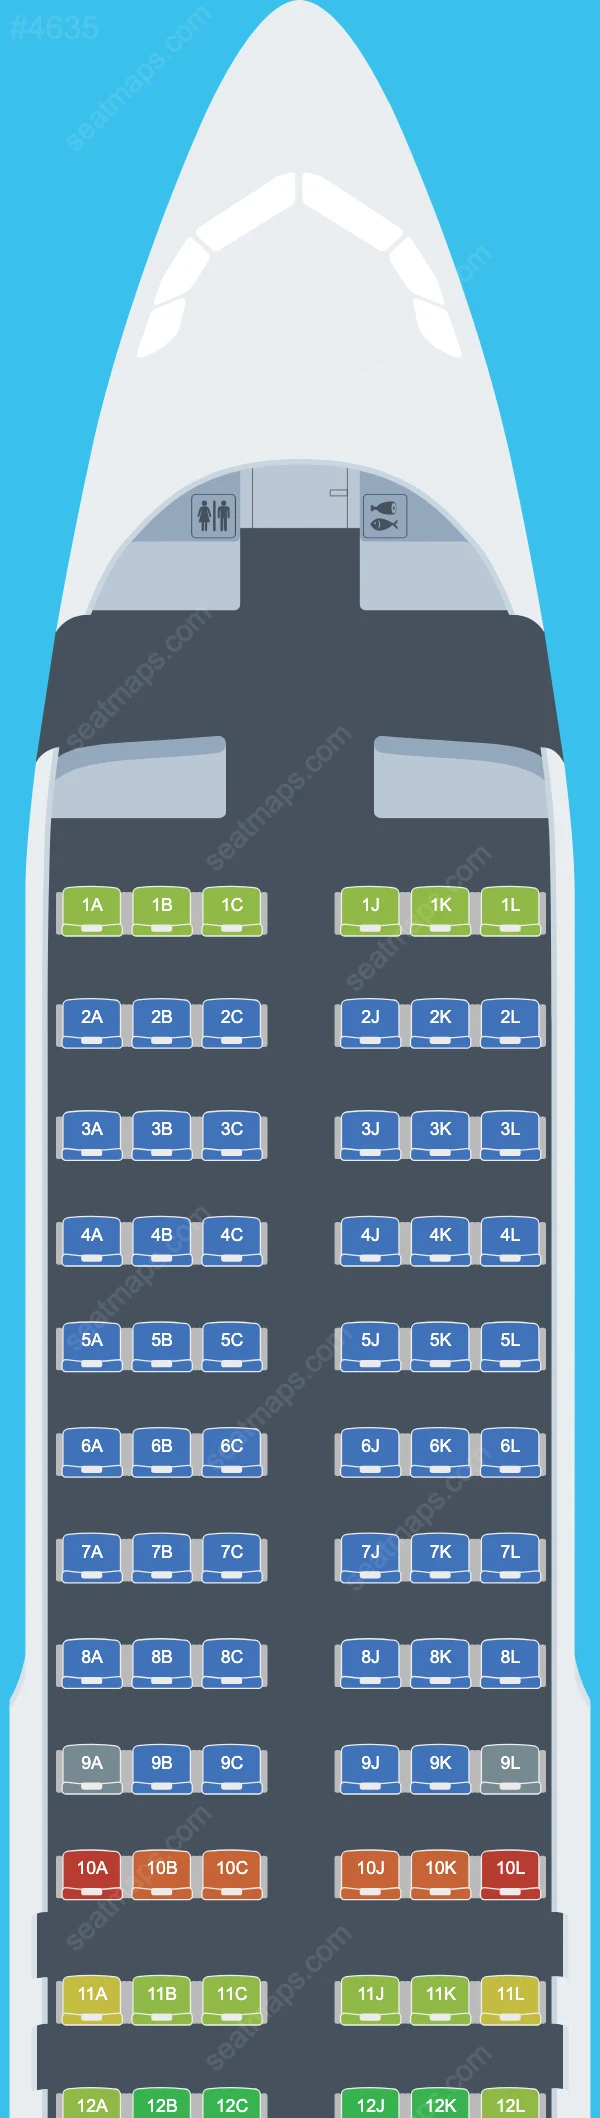 Loong Air Airbus A320-200 seatmap preview